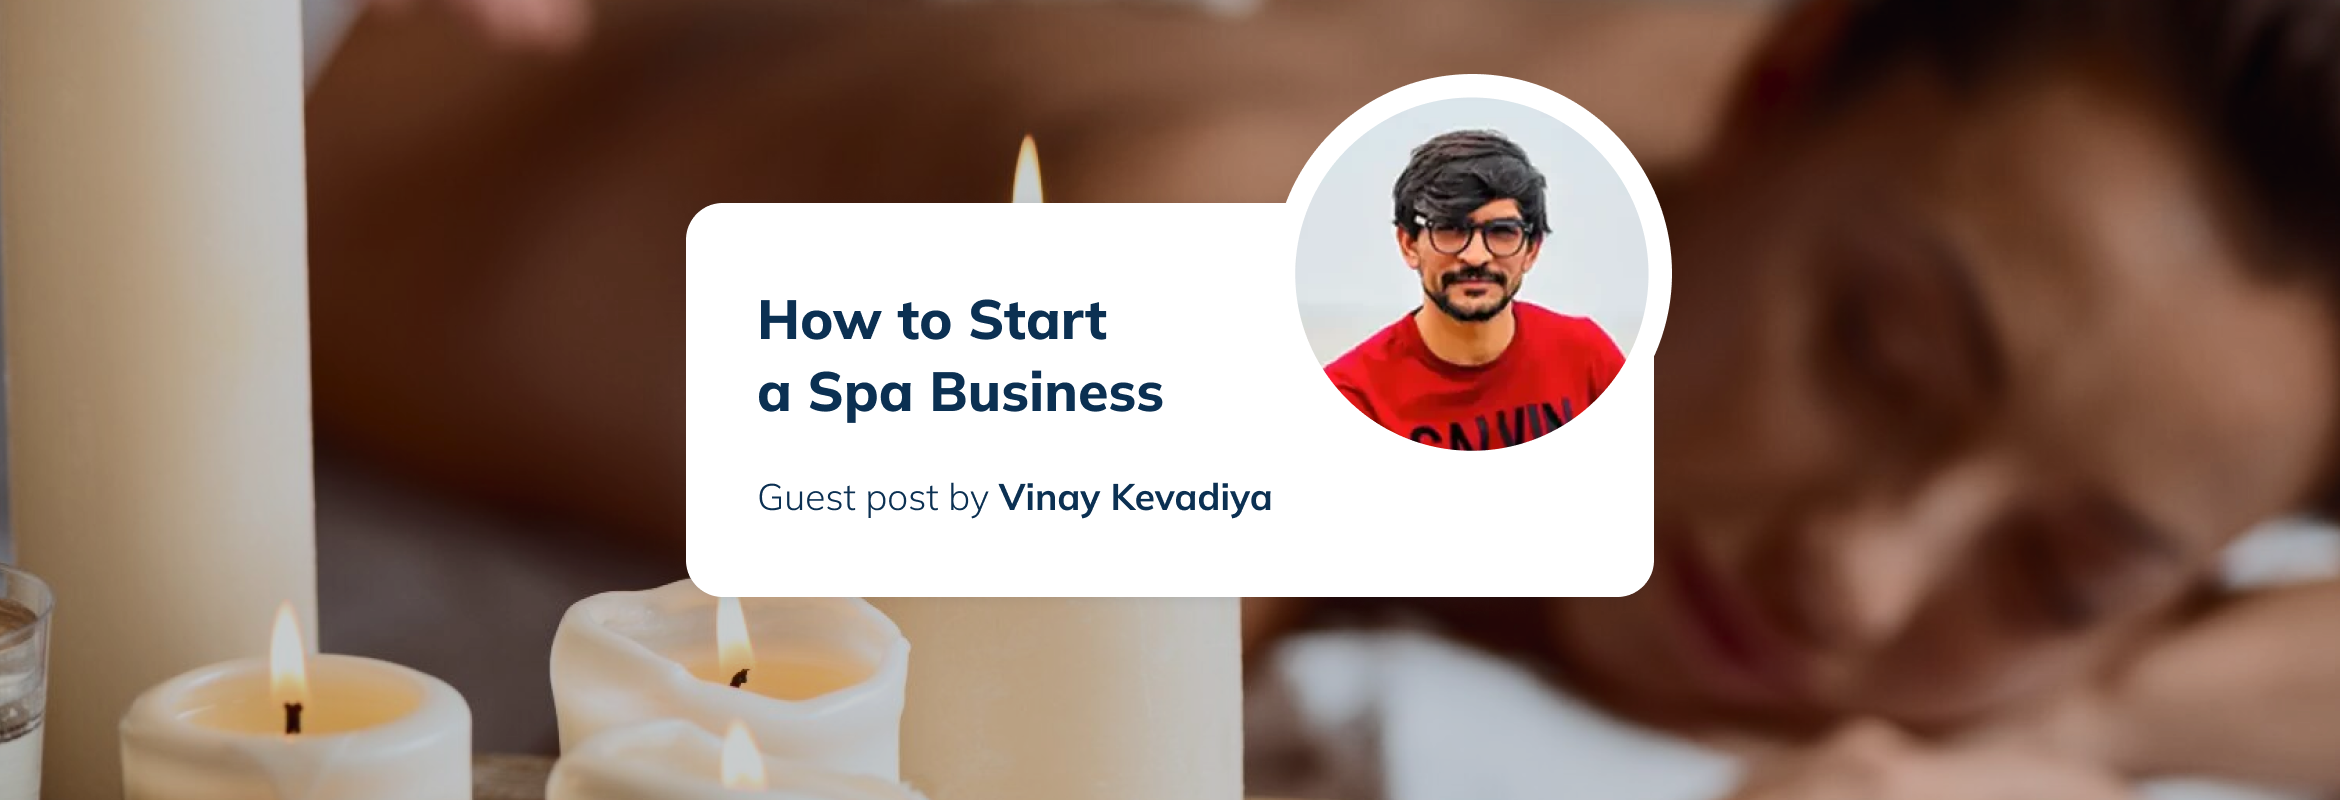 How to Start a Spa Business